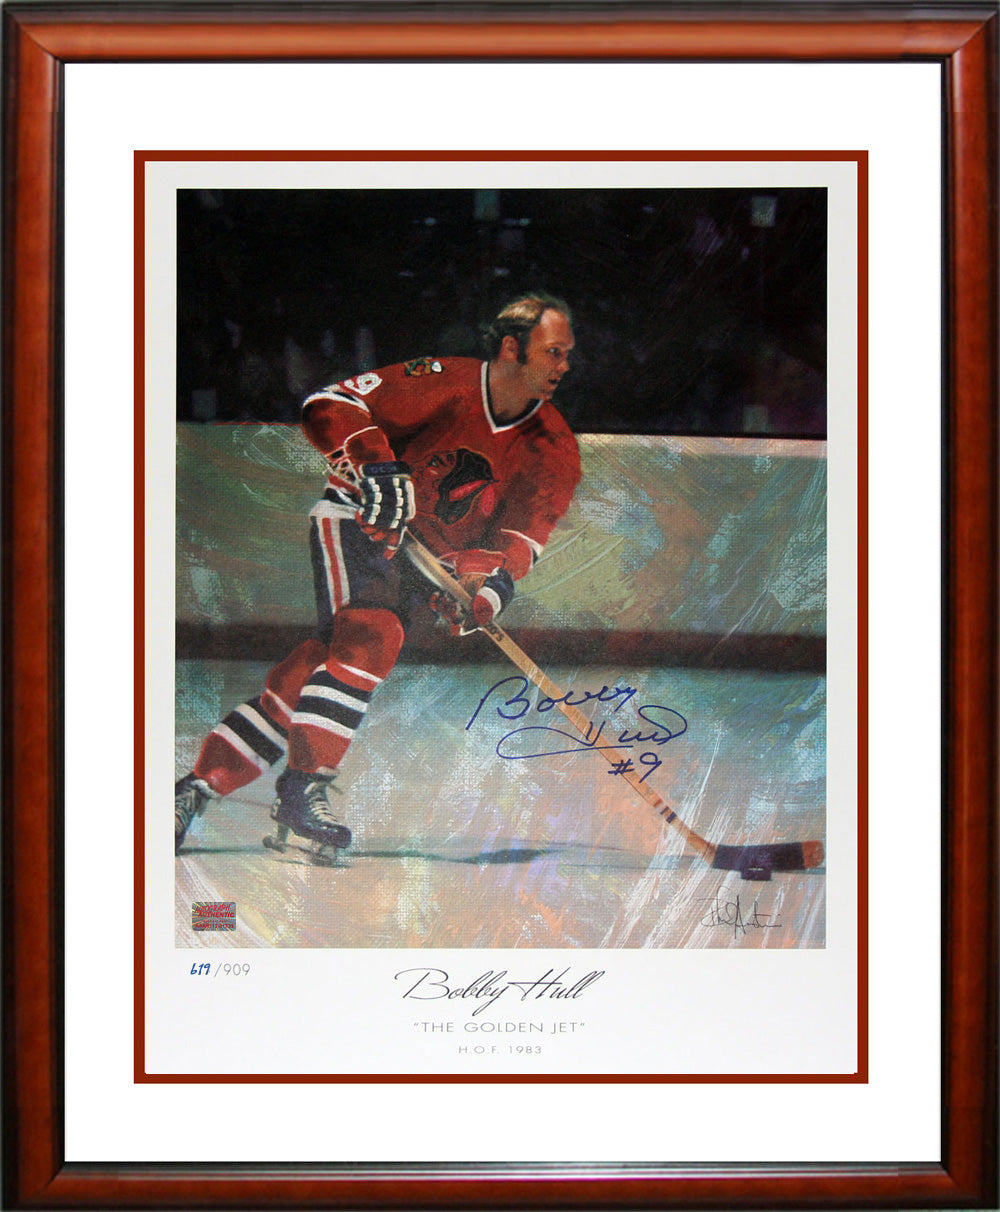 The Golden Jet Lithograph Autographed By Bobby Hull - Limited Edition Of 909, Chicago Blackhawks, NHL, Hockey, Autographed, Signed, AACMH30203